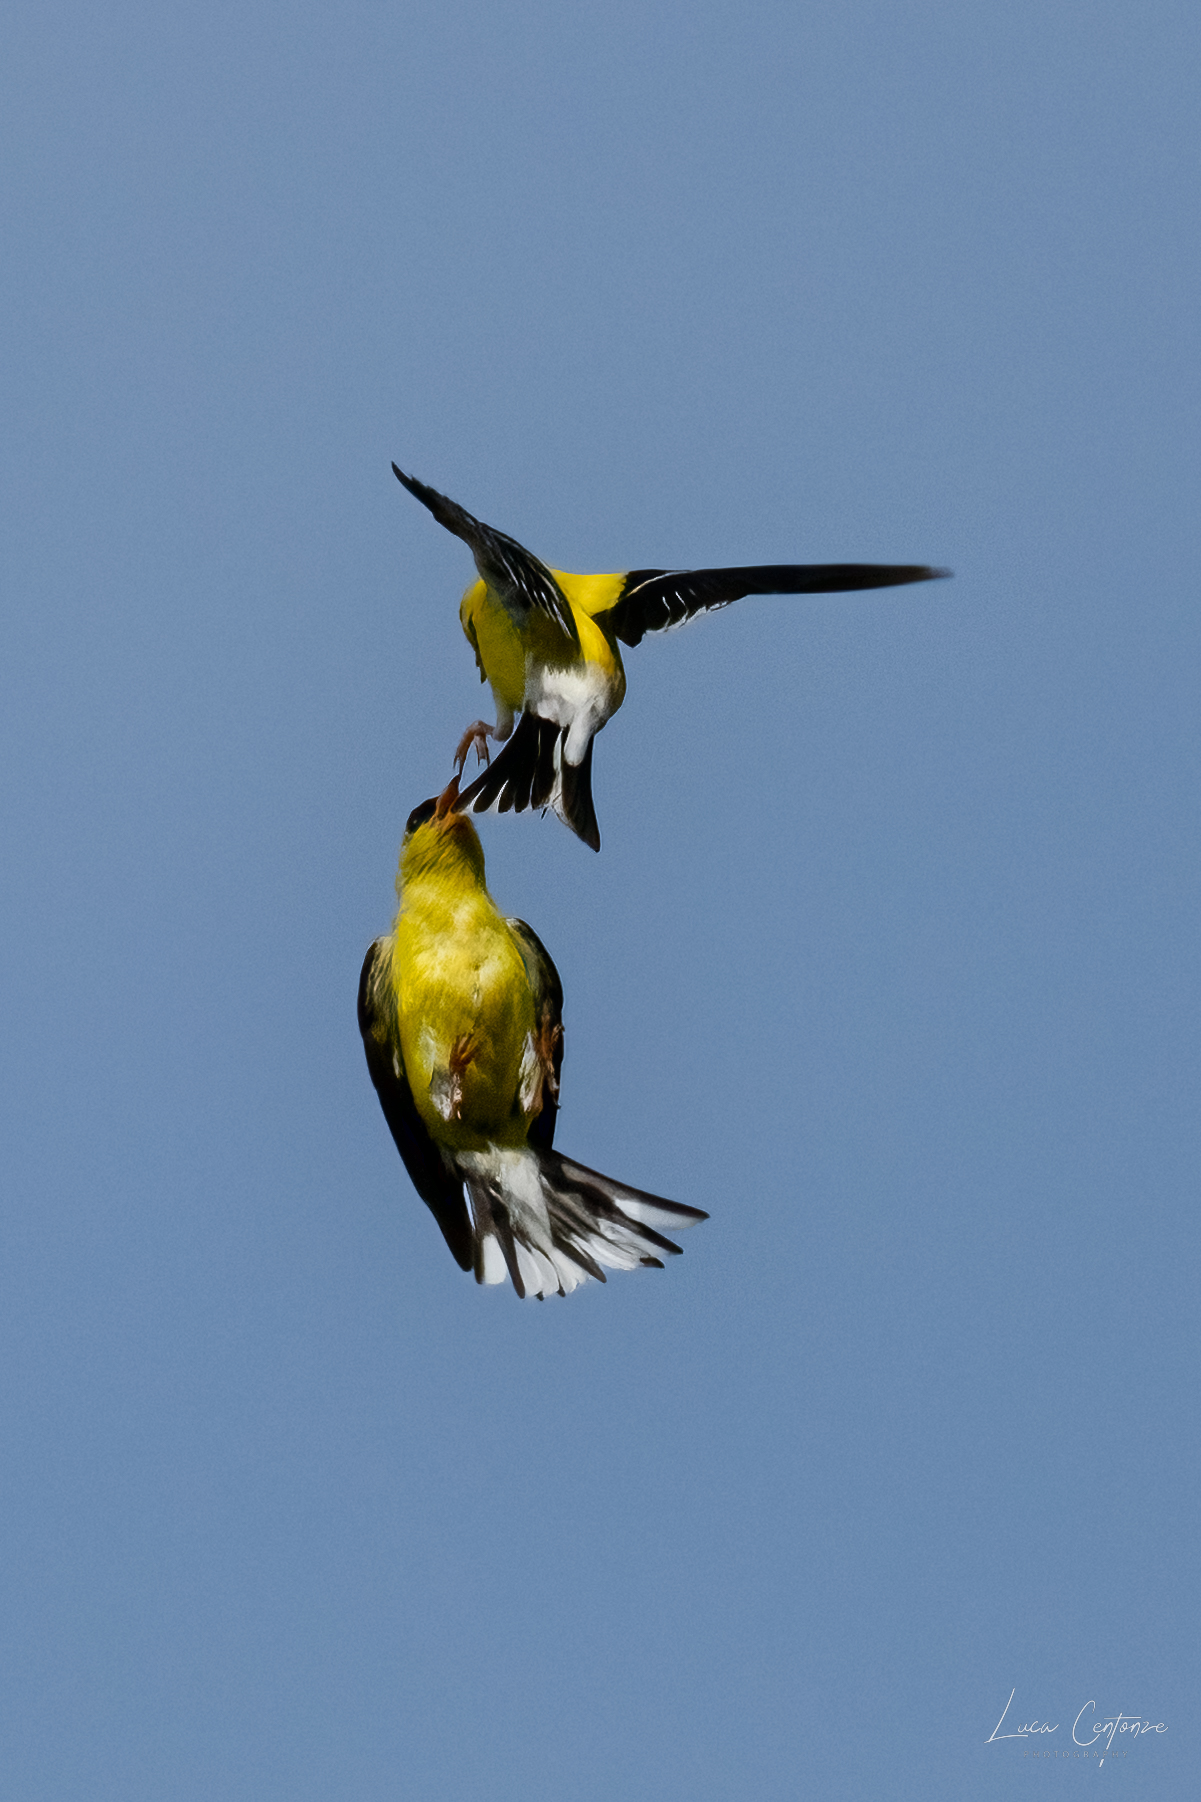 The Gold Finch Dance...